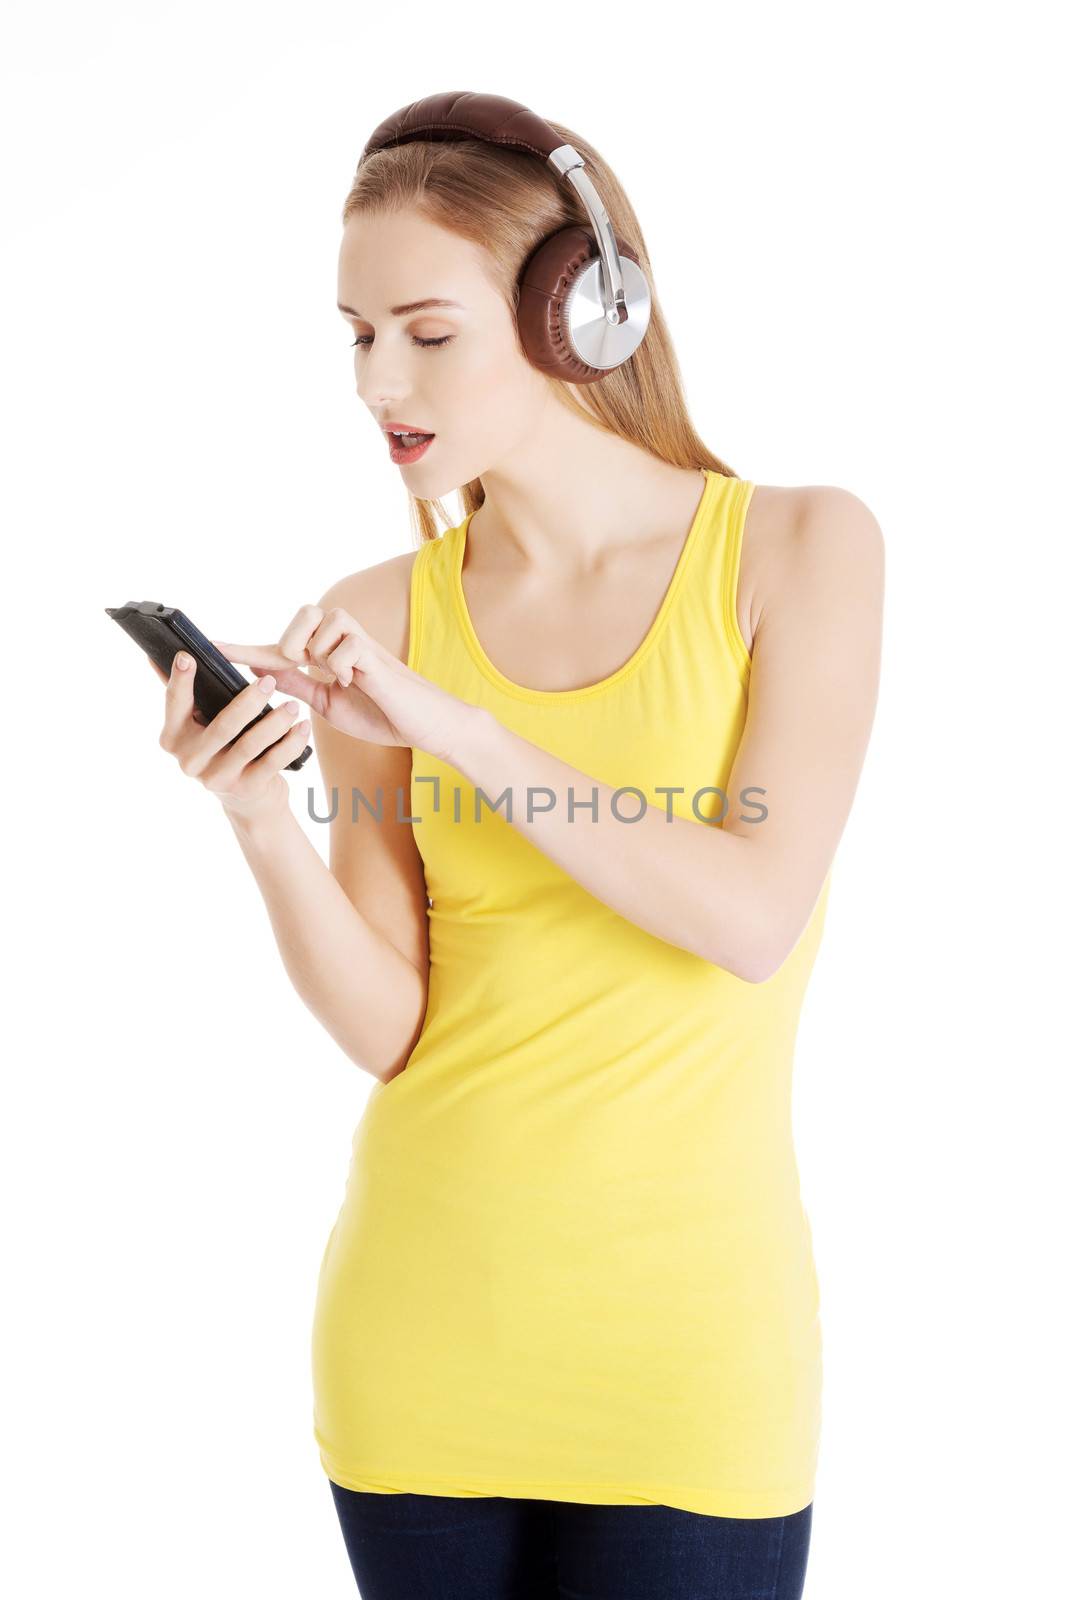 Young beautiful woman listening to music with headphones. Isolated on white.